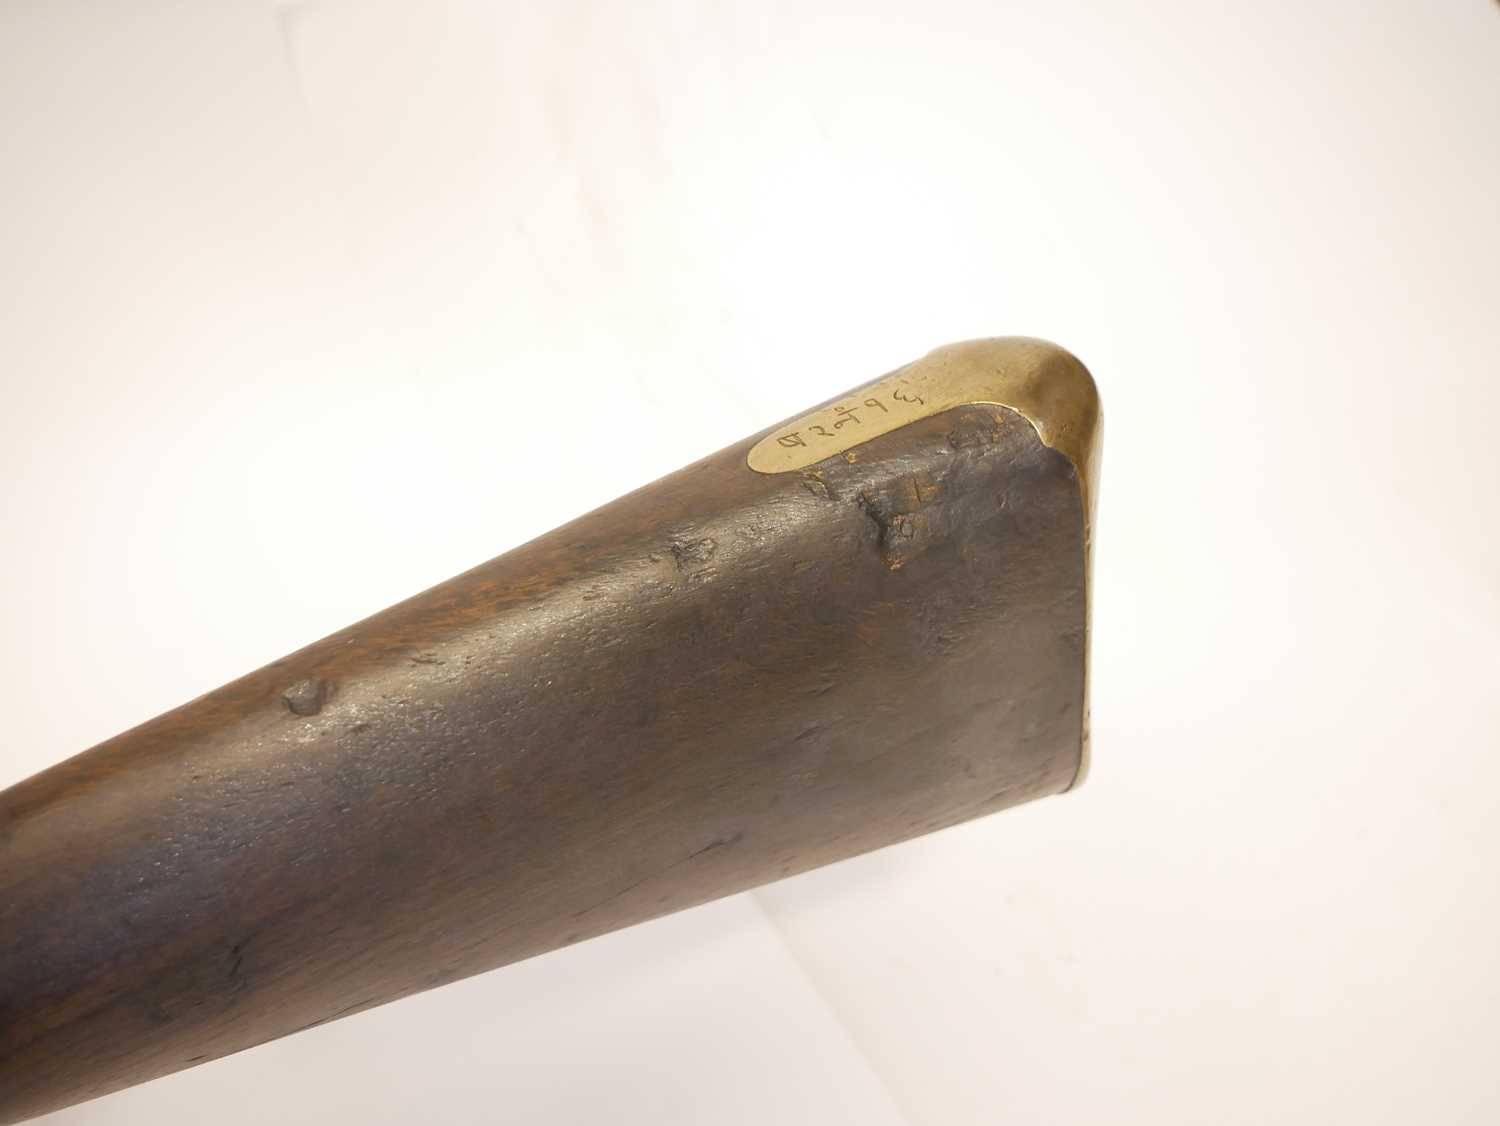 East India Company pattern D type 3 musket, - Image 11 of 14